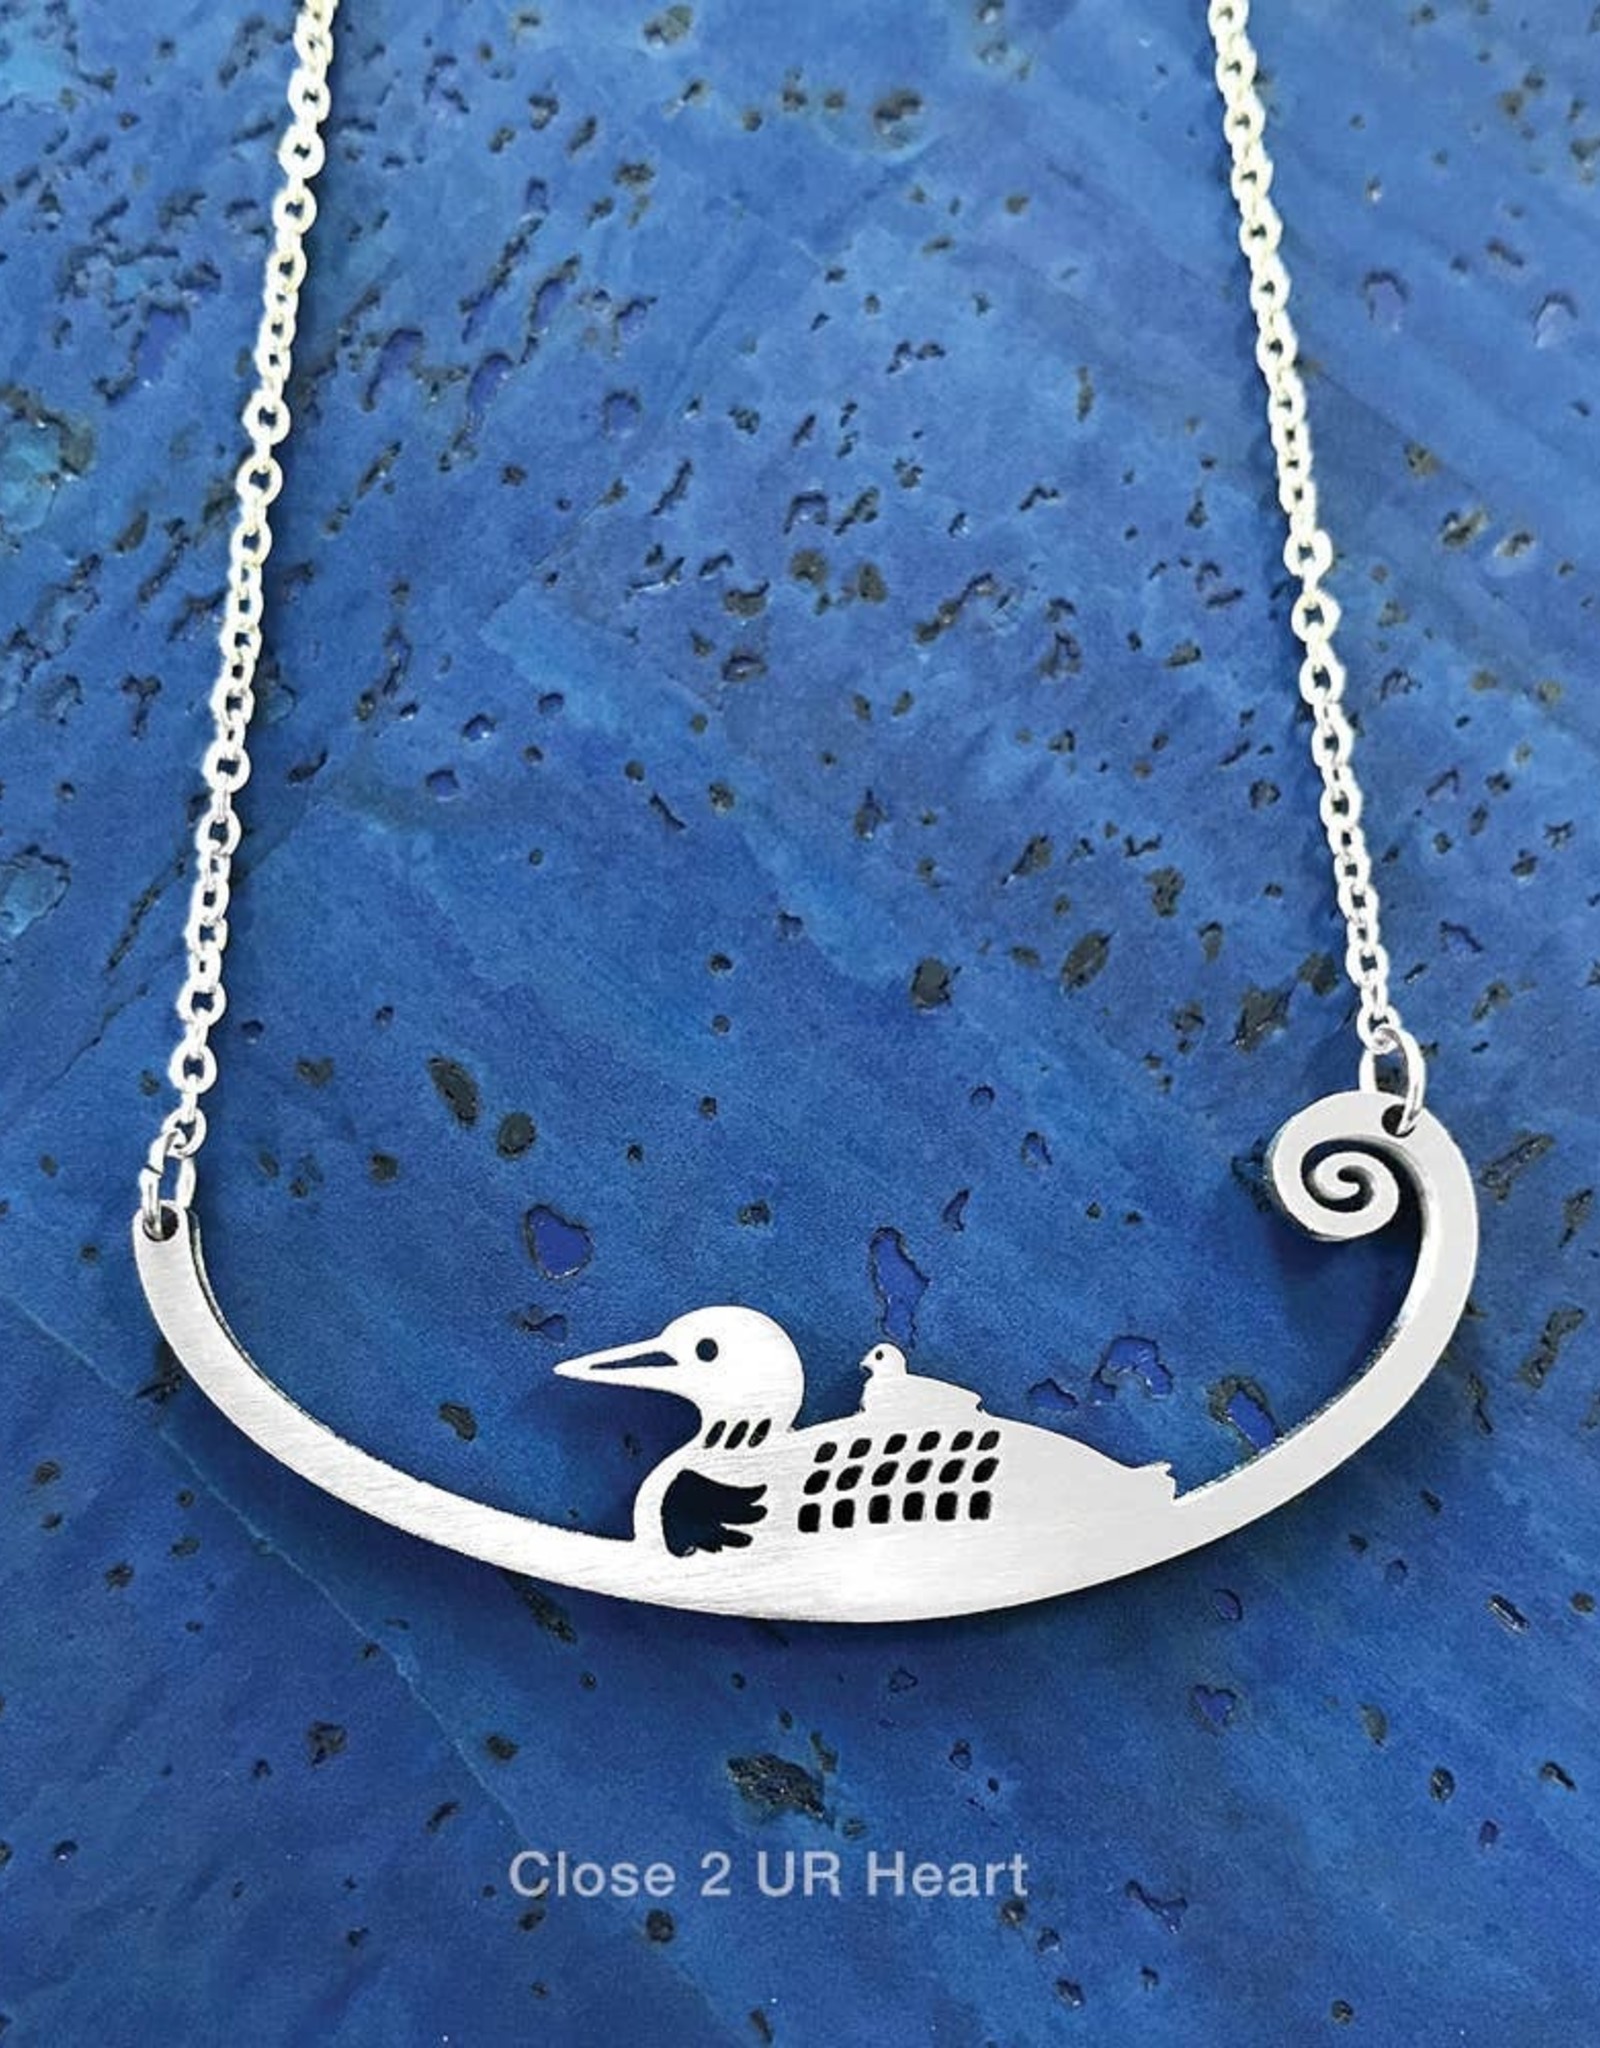 Close 2 UR Heart Loons Stainless Steel Necklace